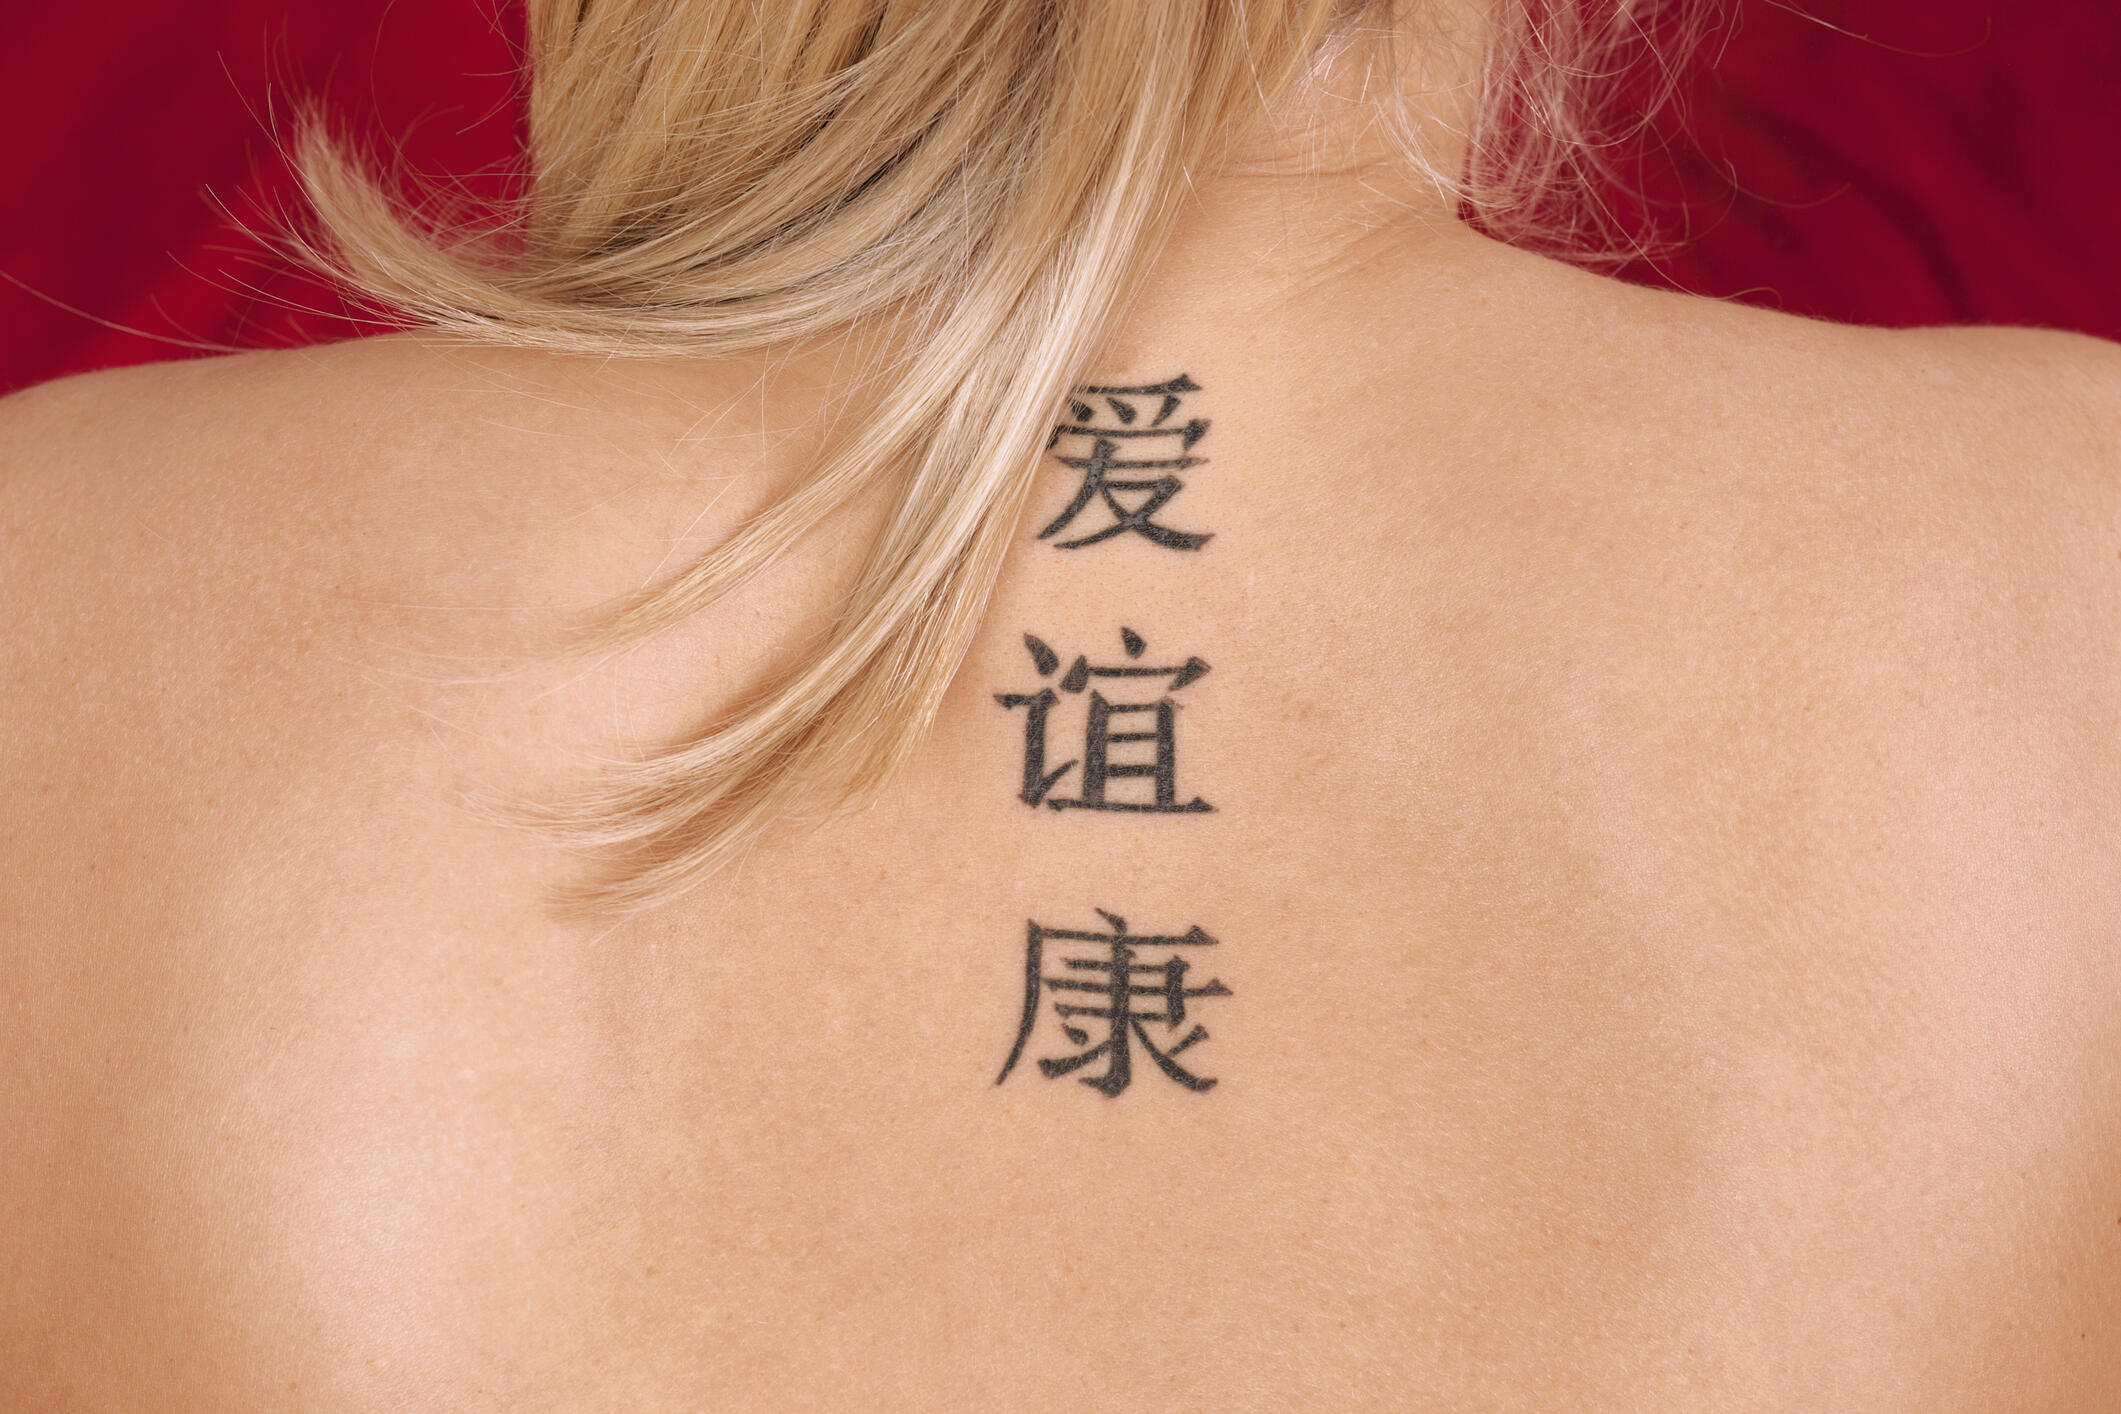 Woman's Tattoo Probably Doesn't Say What She Thinks It Does | iHeart